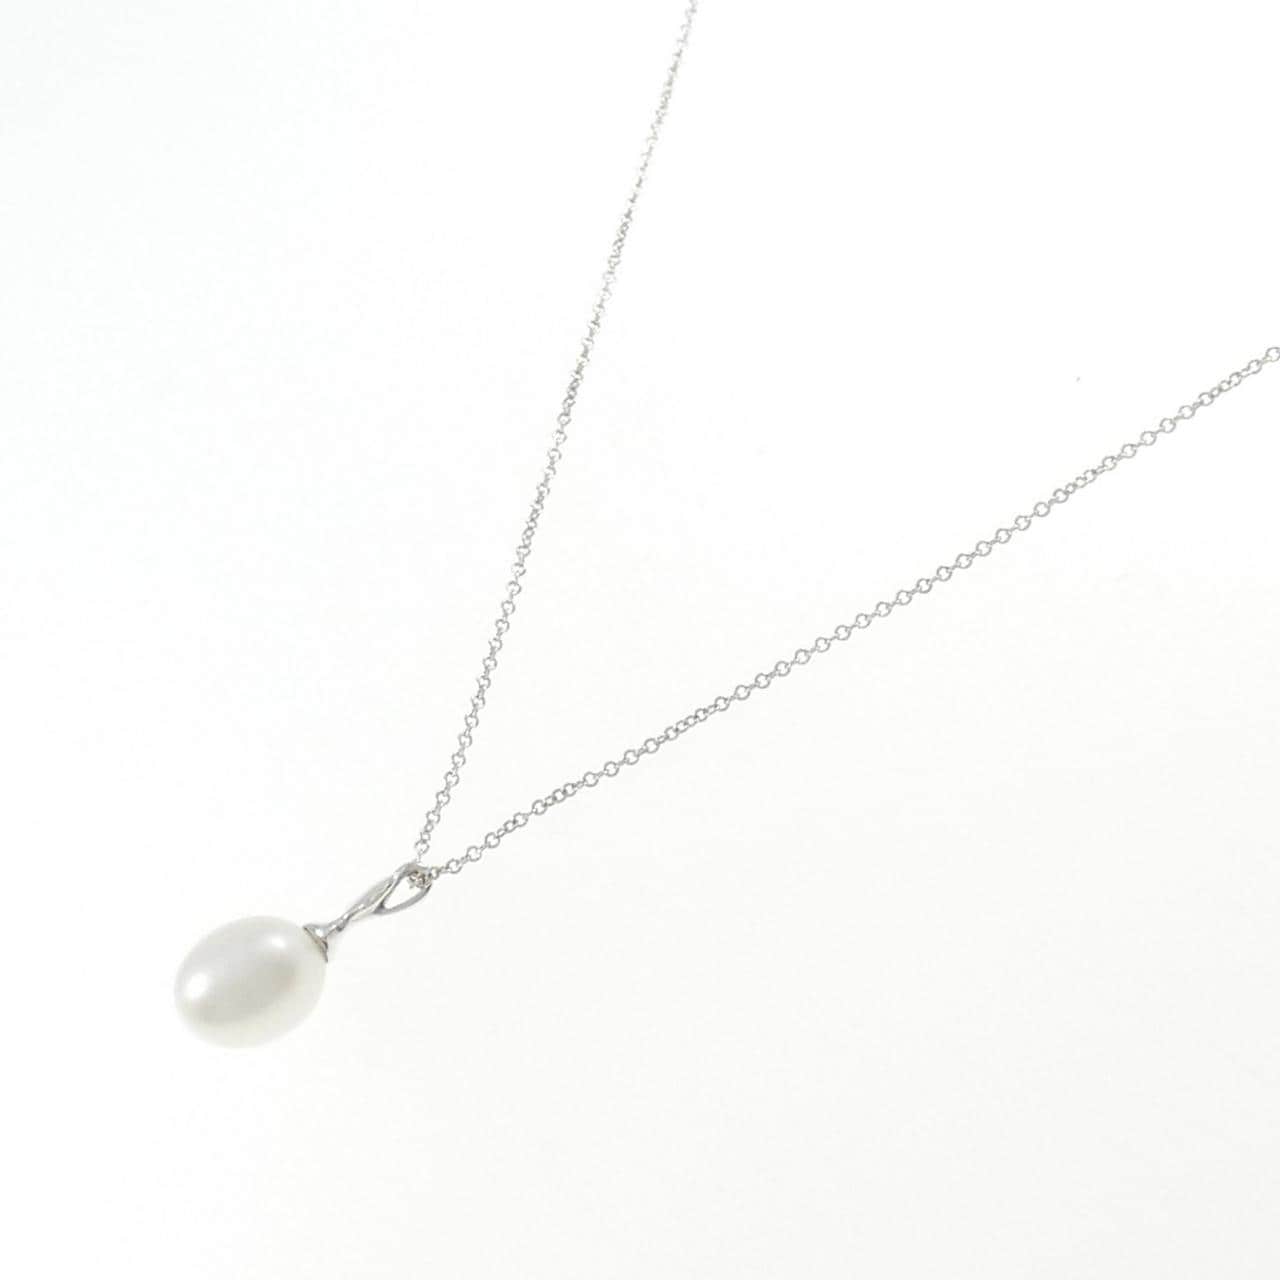 Tiffany & Co. Tripple Pearl Lariat Pendant Chain Necklace 18k White Go –  The Jewelry Gallery of Oyster Bay